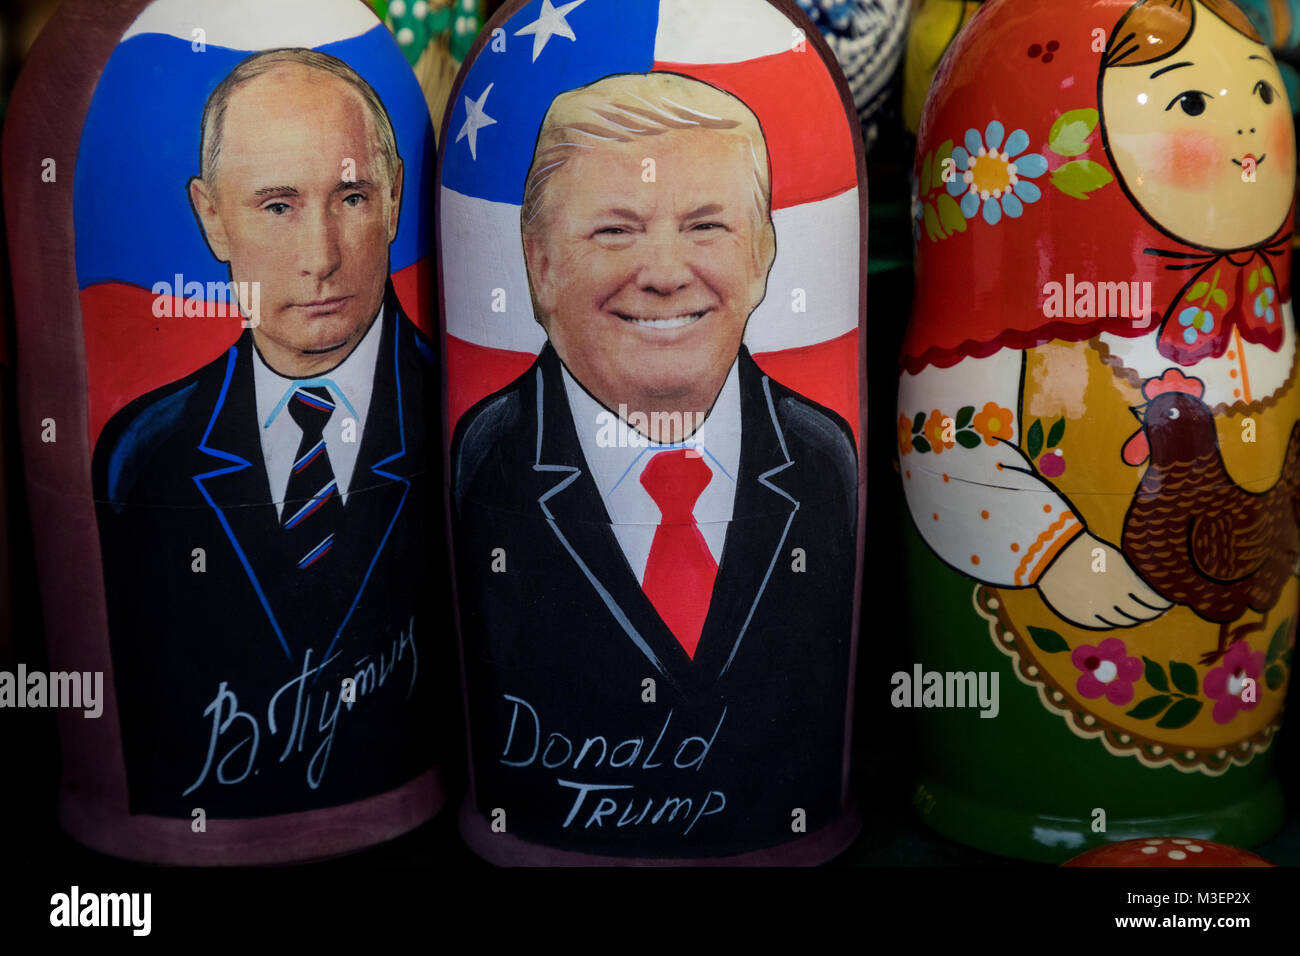 Russian traditional toys - Matryoshka with a portrait of presidents Donald Trump and Vladimir Putin in souvenir kiosk on the Red square in Moscow Stock Photo